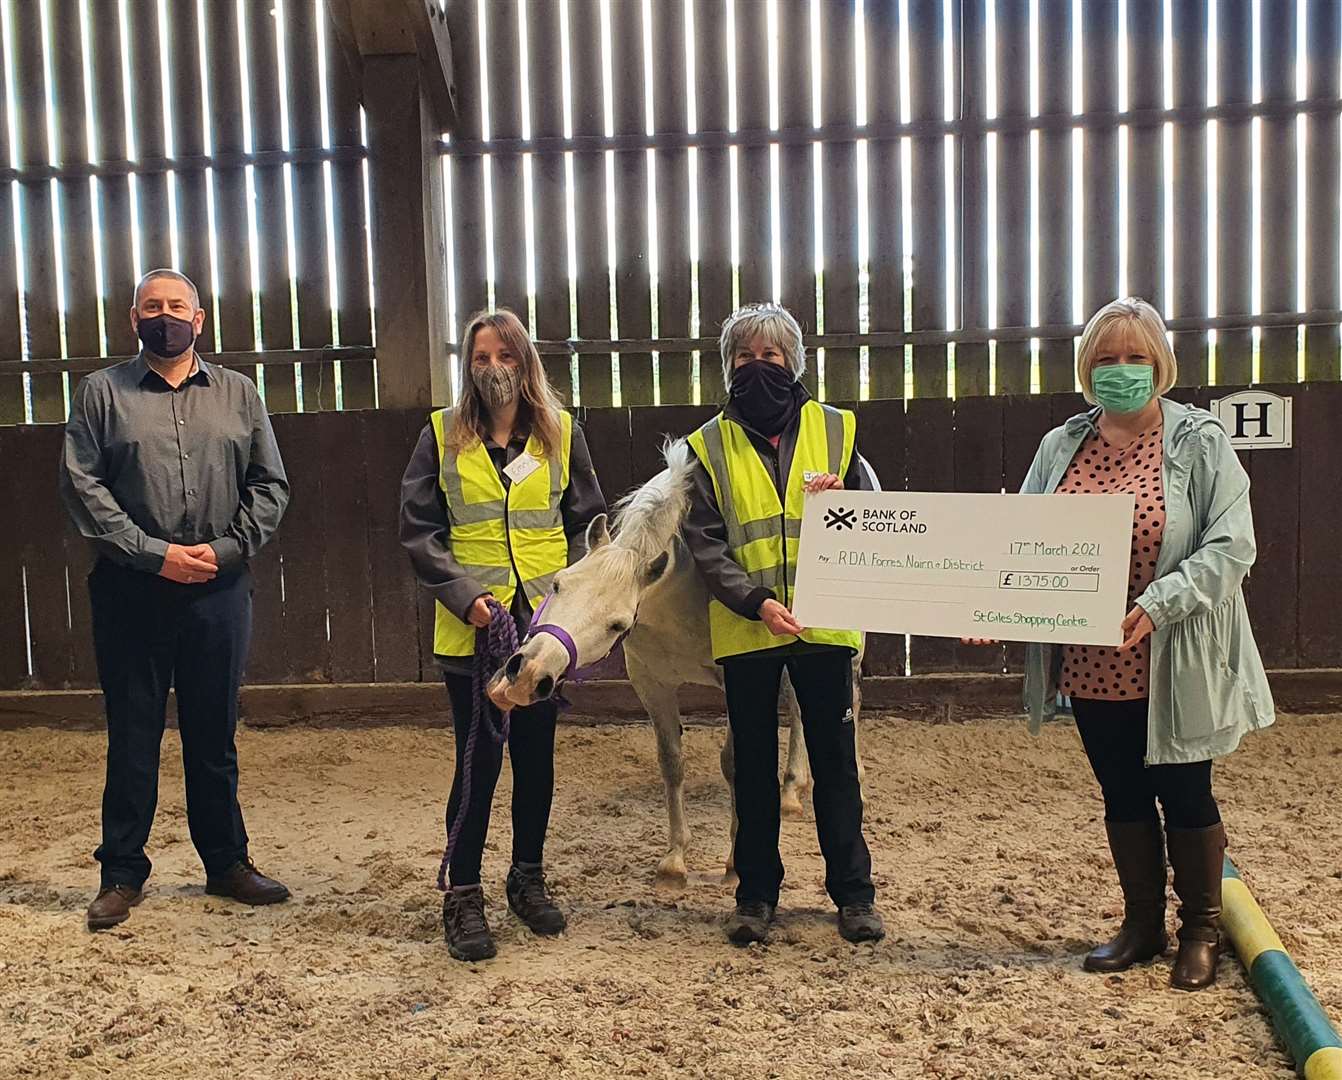 St Giles manager Stephen Young (left) and colleague Angie Chisholm (right) presenting the cheque to RDA trustees Emma Gregg and Julie Campbell.